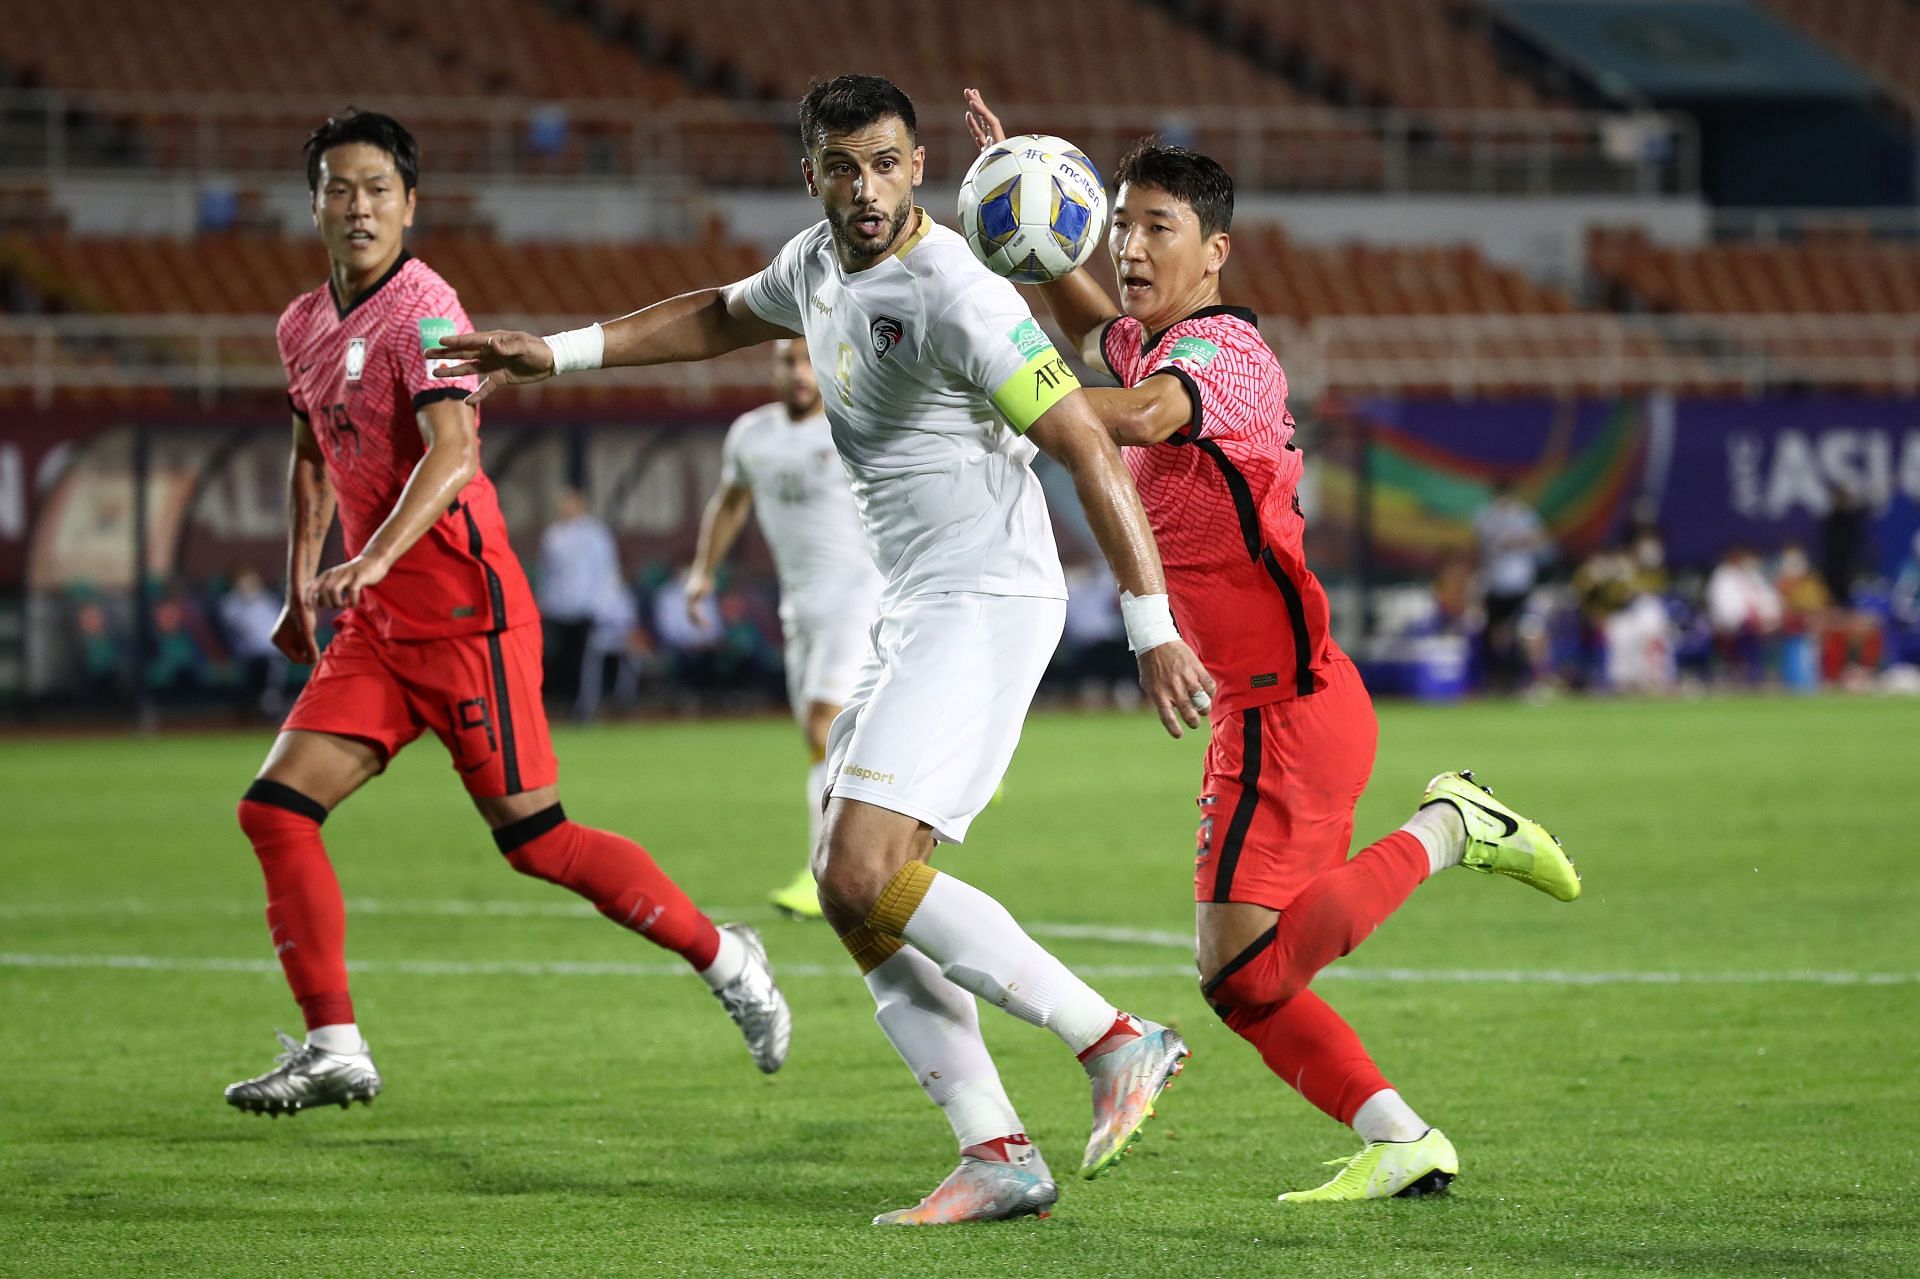 Syria are looking to finish their qualifying campaign with back-to-back wins